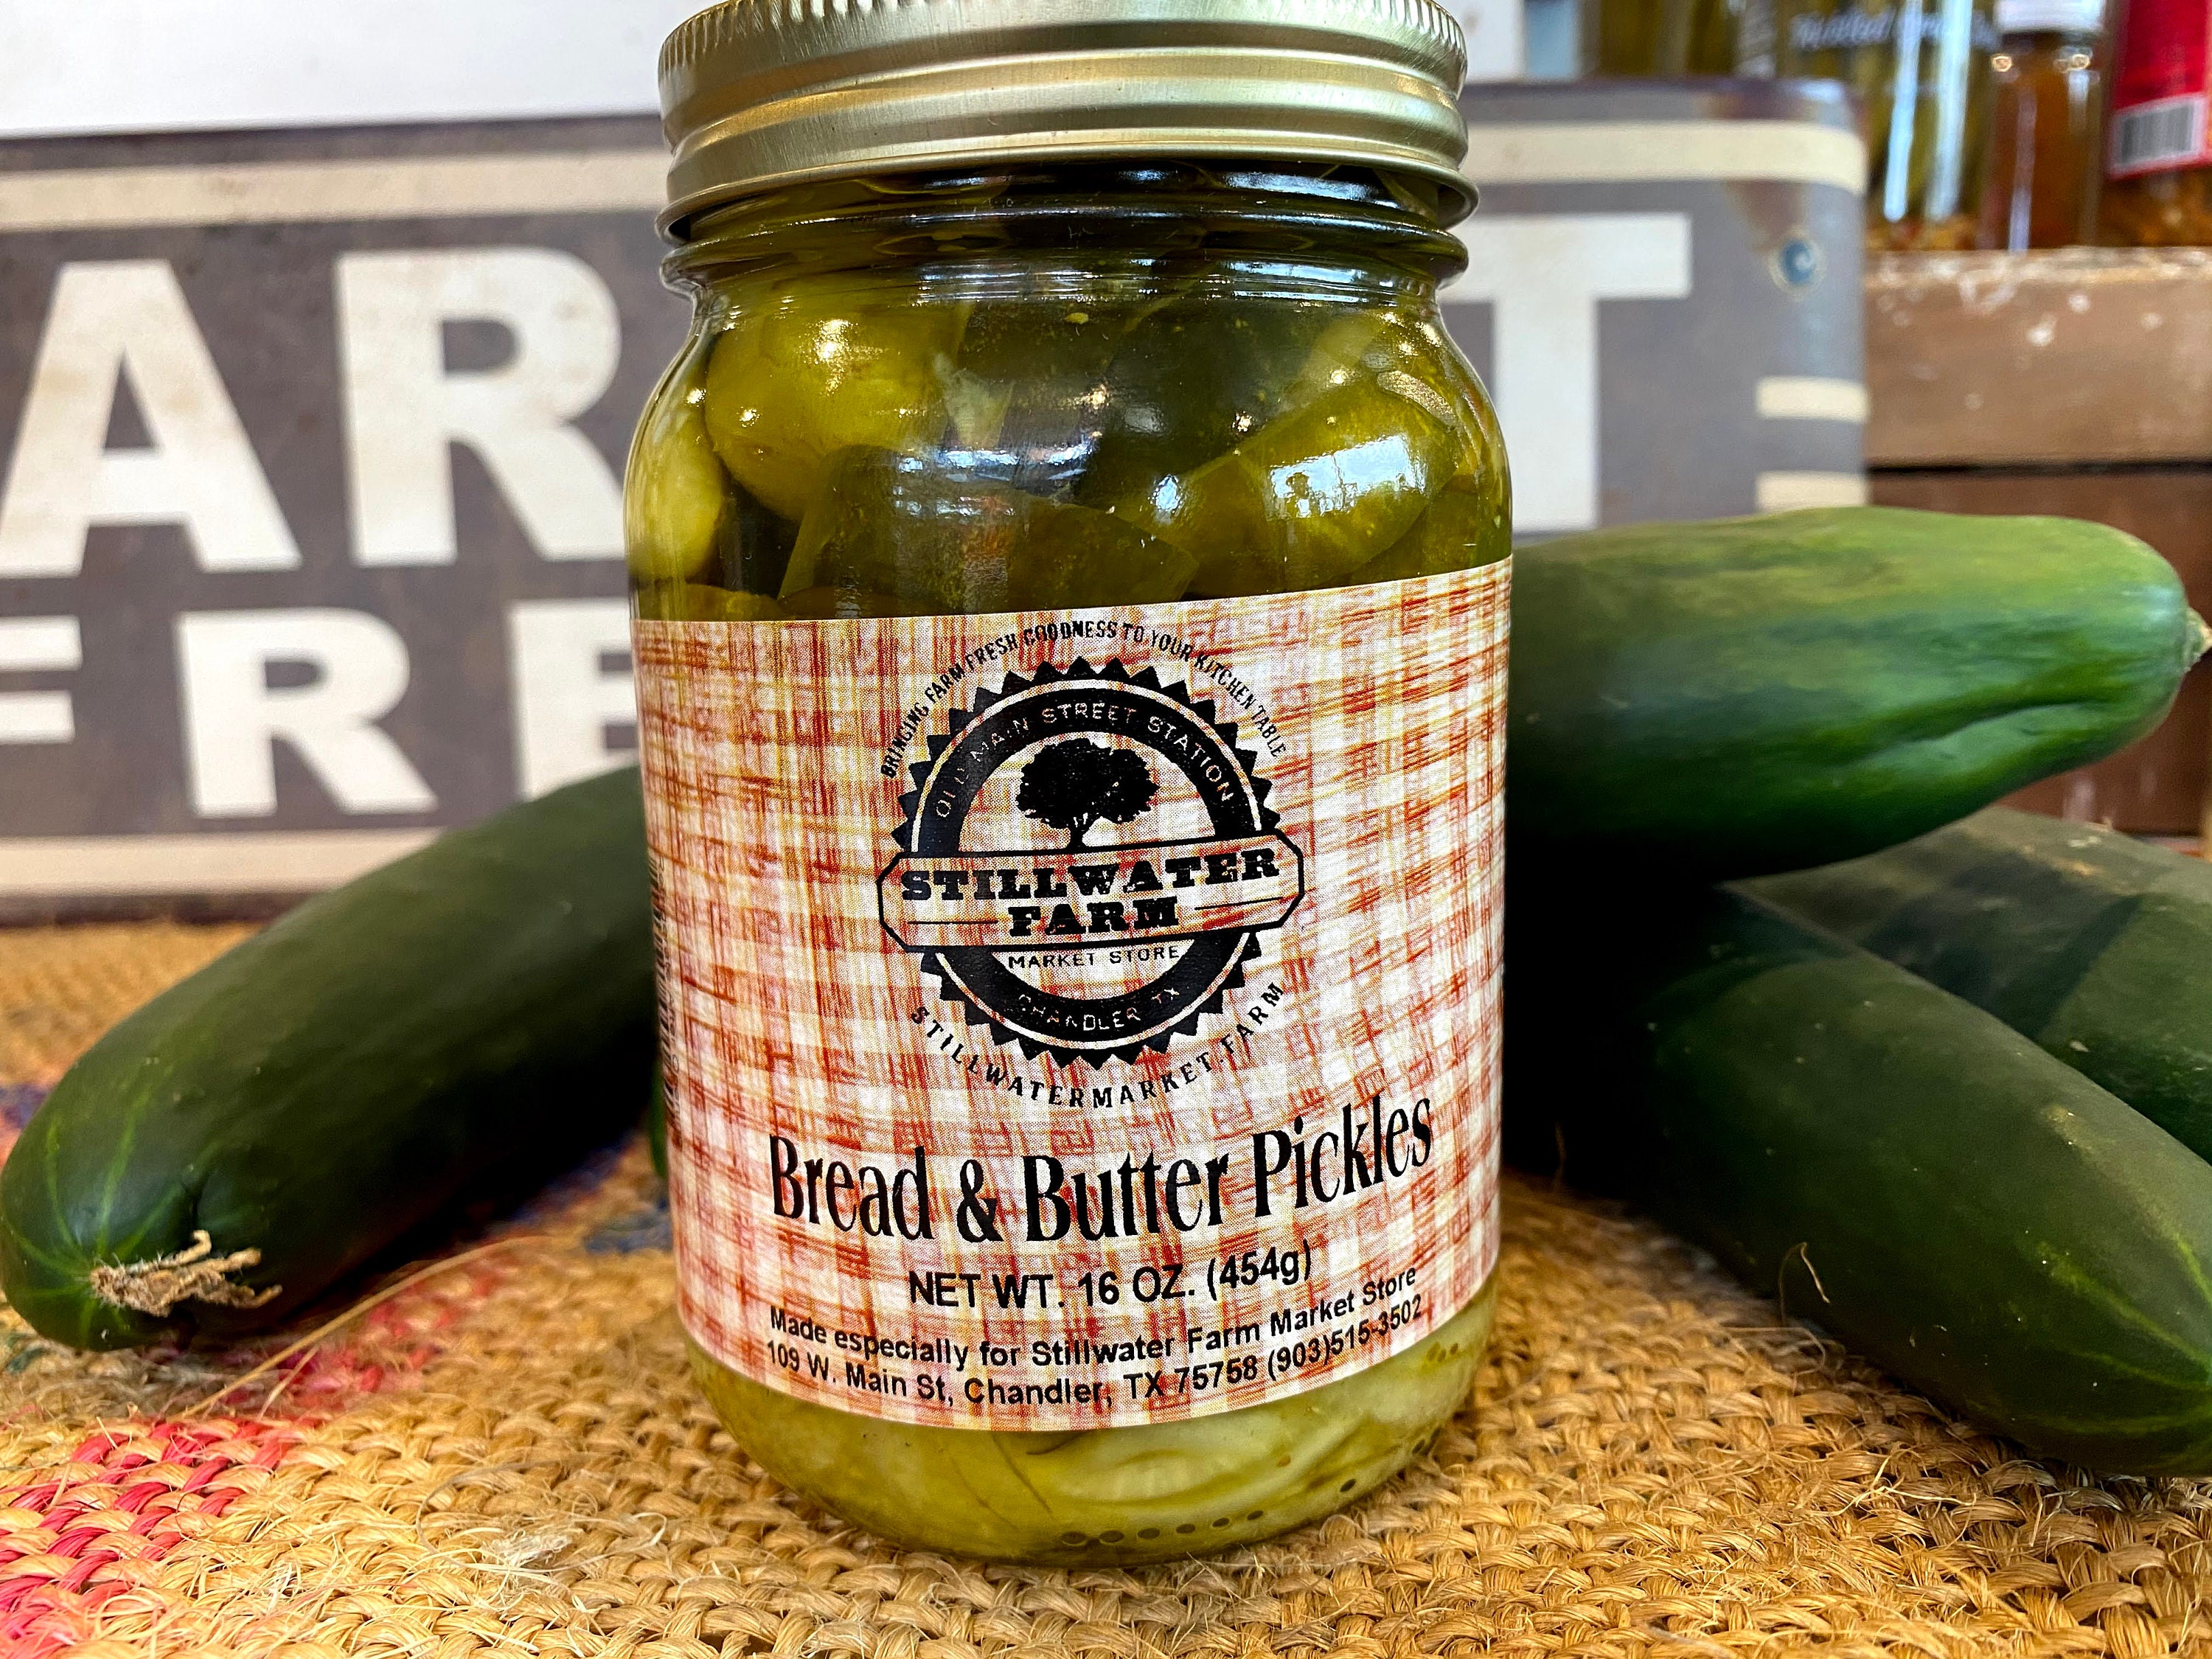 Sweet and Sour Pickles, Gourmet Food Gifts, Sweet Pickles, Bread and Butter  Pickles, Pickle Lover Gift, Foodie Gift, Handmade, Farm to Table 